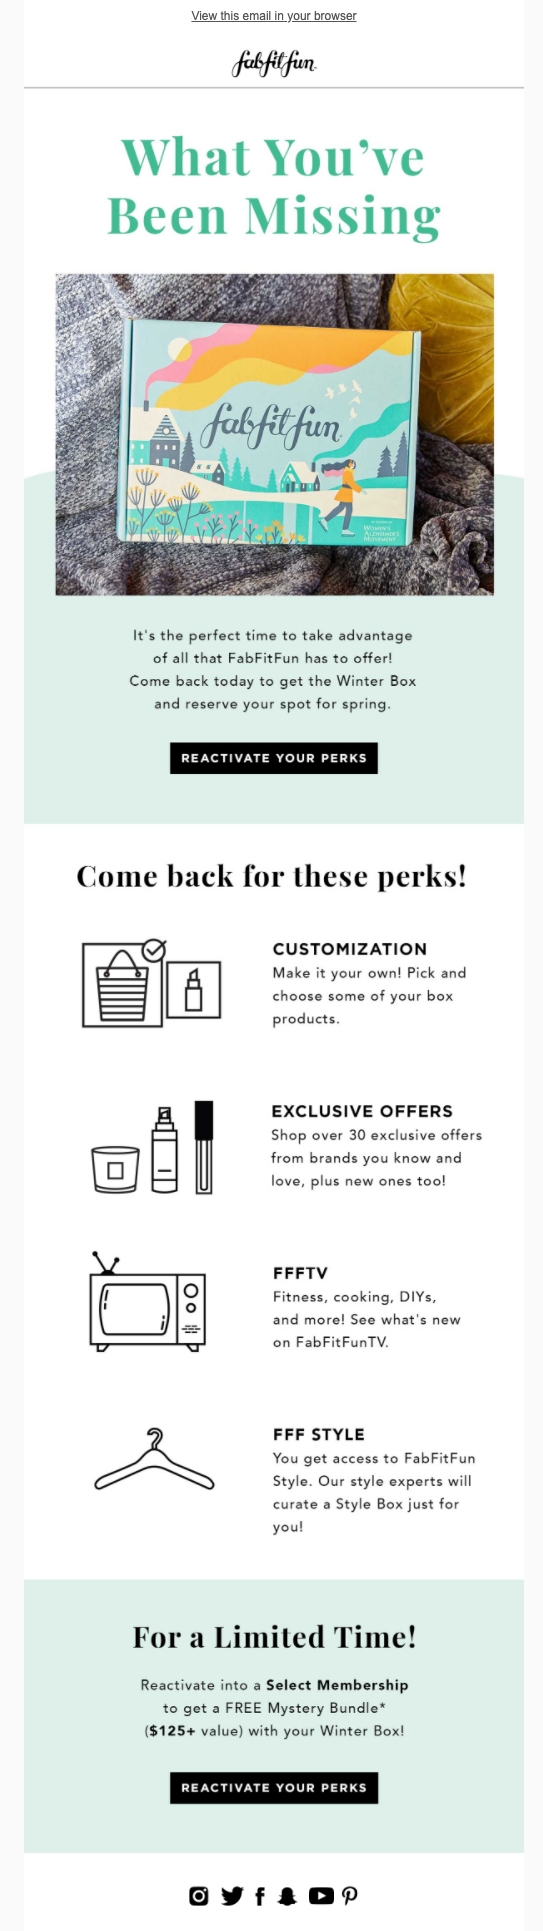 Fabfitfun email to lapsed subscribers advertising an image of the subscription box, bright graphics alongside an explanation of perks, and limited time mystery bundle upon resubscription. 